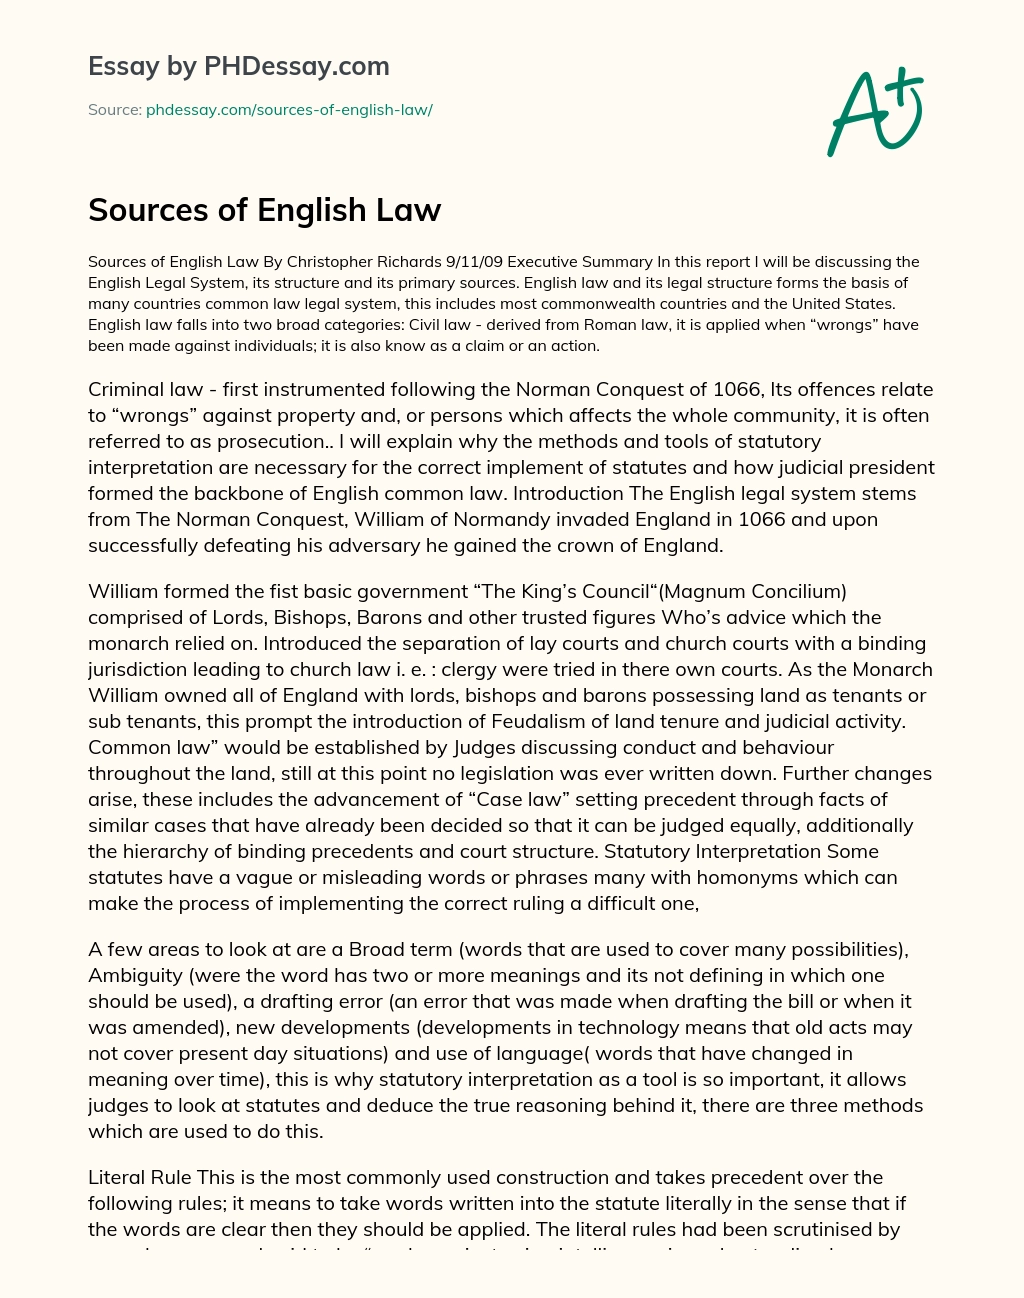 Sources of English Law essay